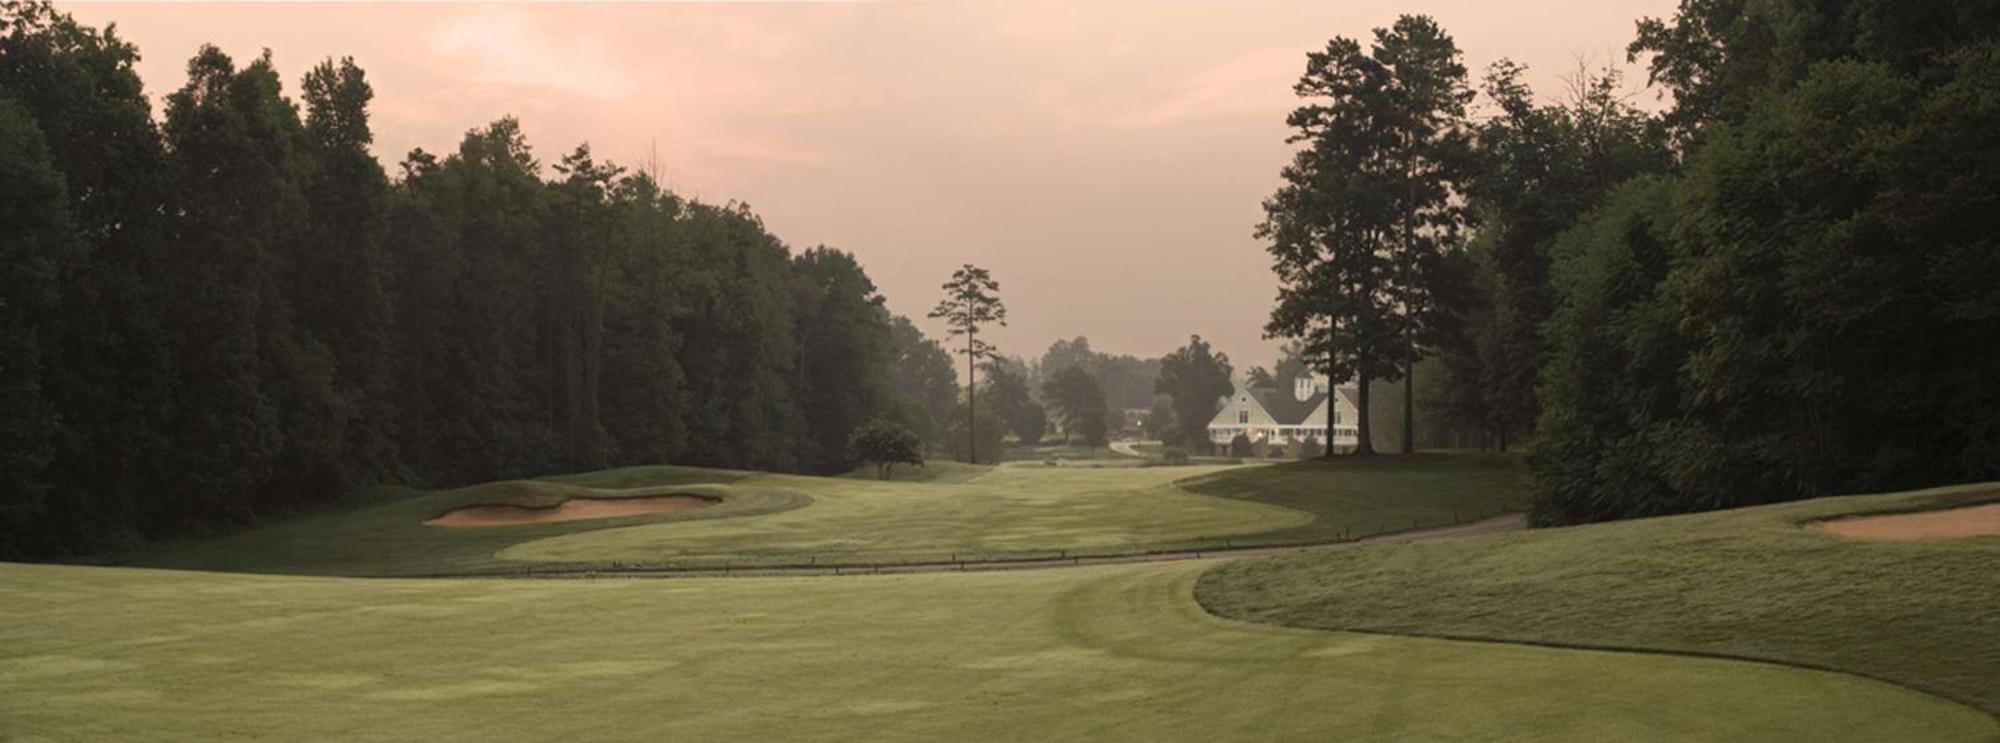 Embassy Suites By Hilton Charlotte Concord Golf Resort & Spa Facilities photo